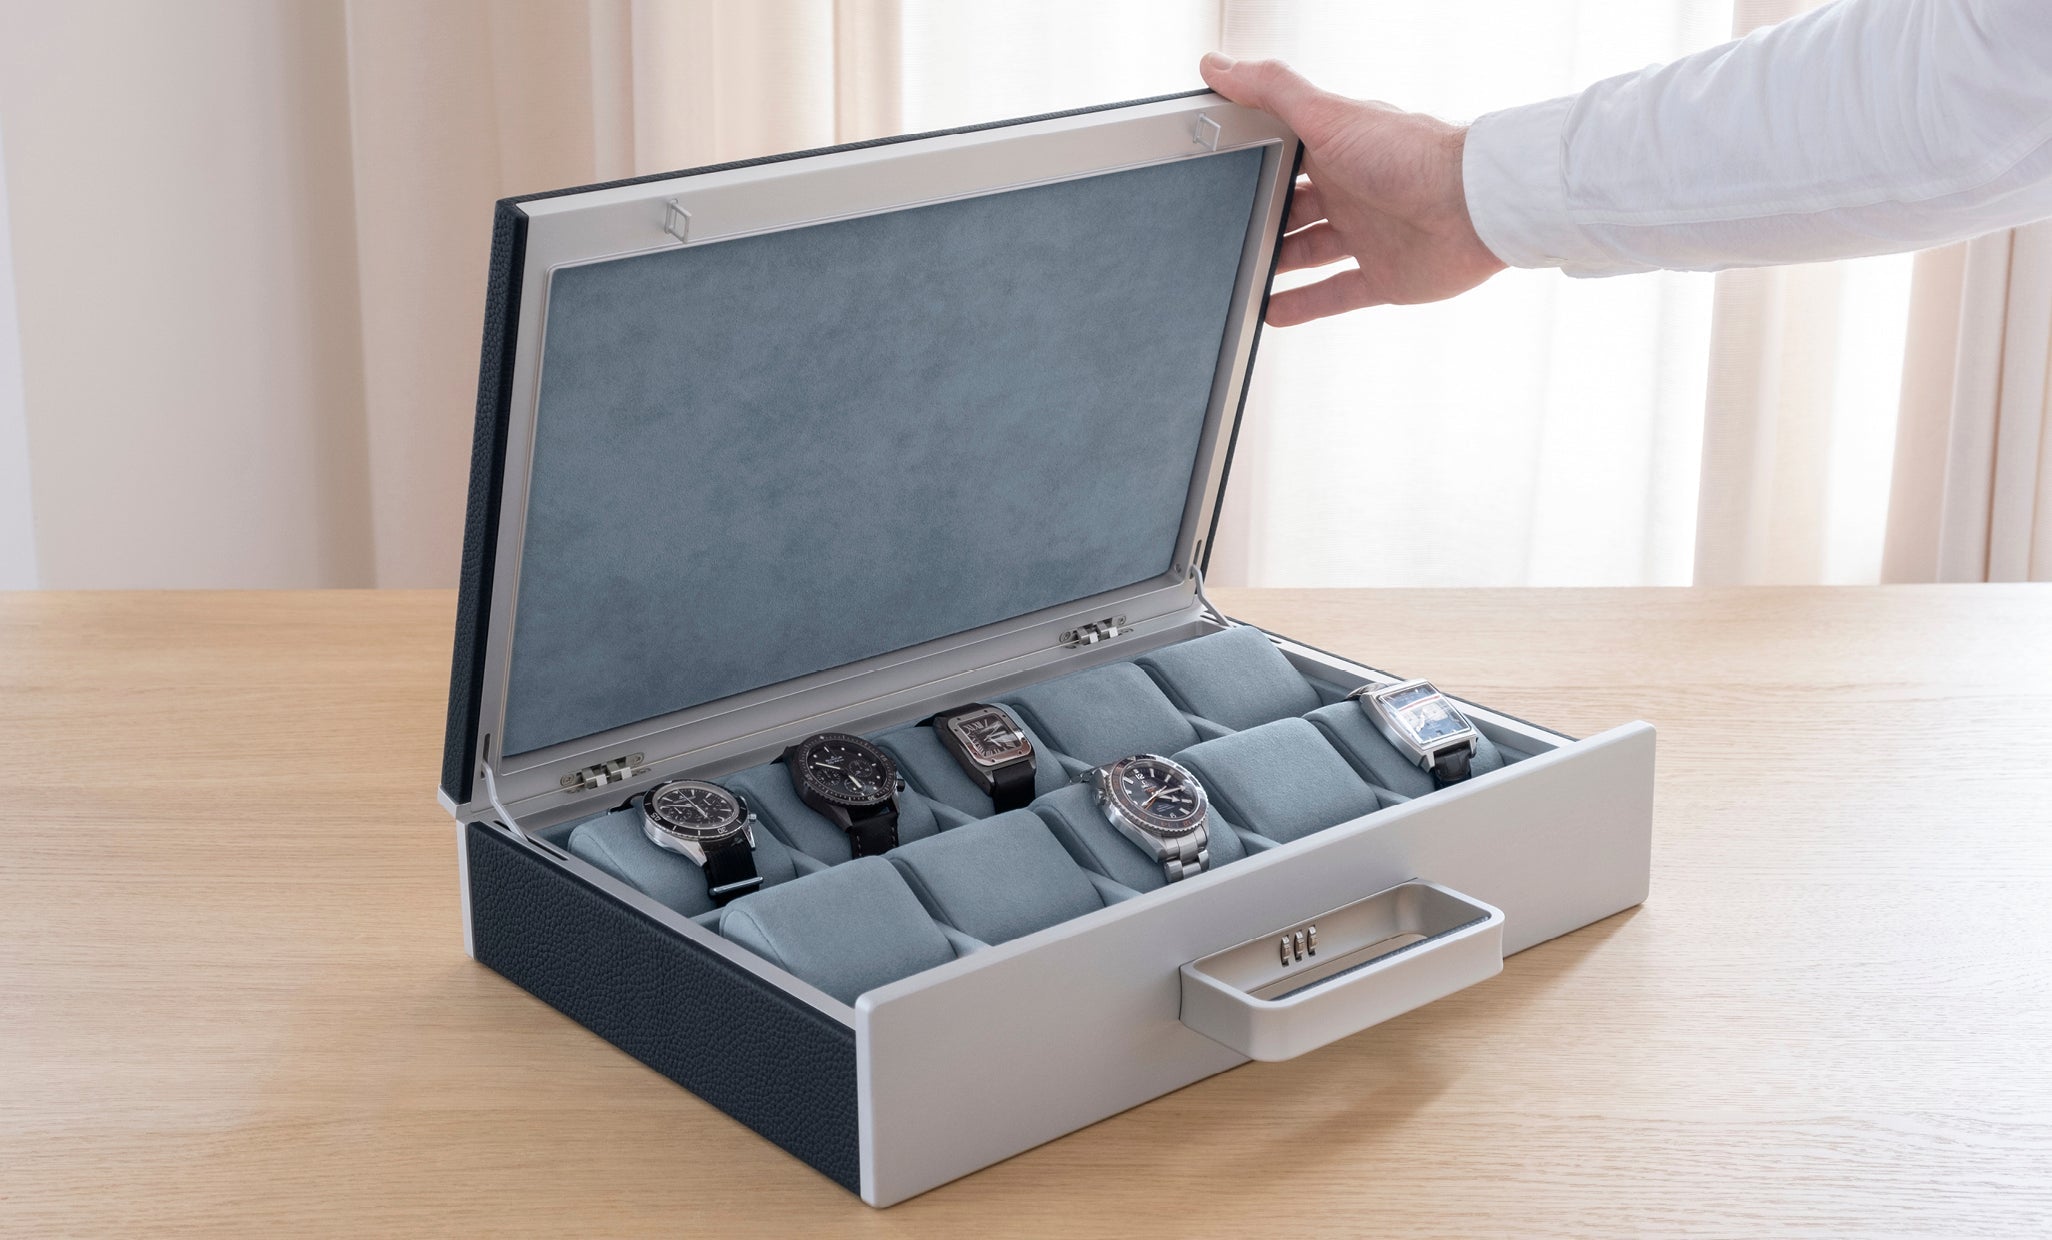 MACKENZIE 10 WATCH BRIEFCASE, organizer for up to 10 watches, watch briefcase with 10 slots, travel case for up to 10 watches